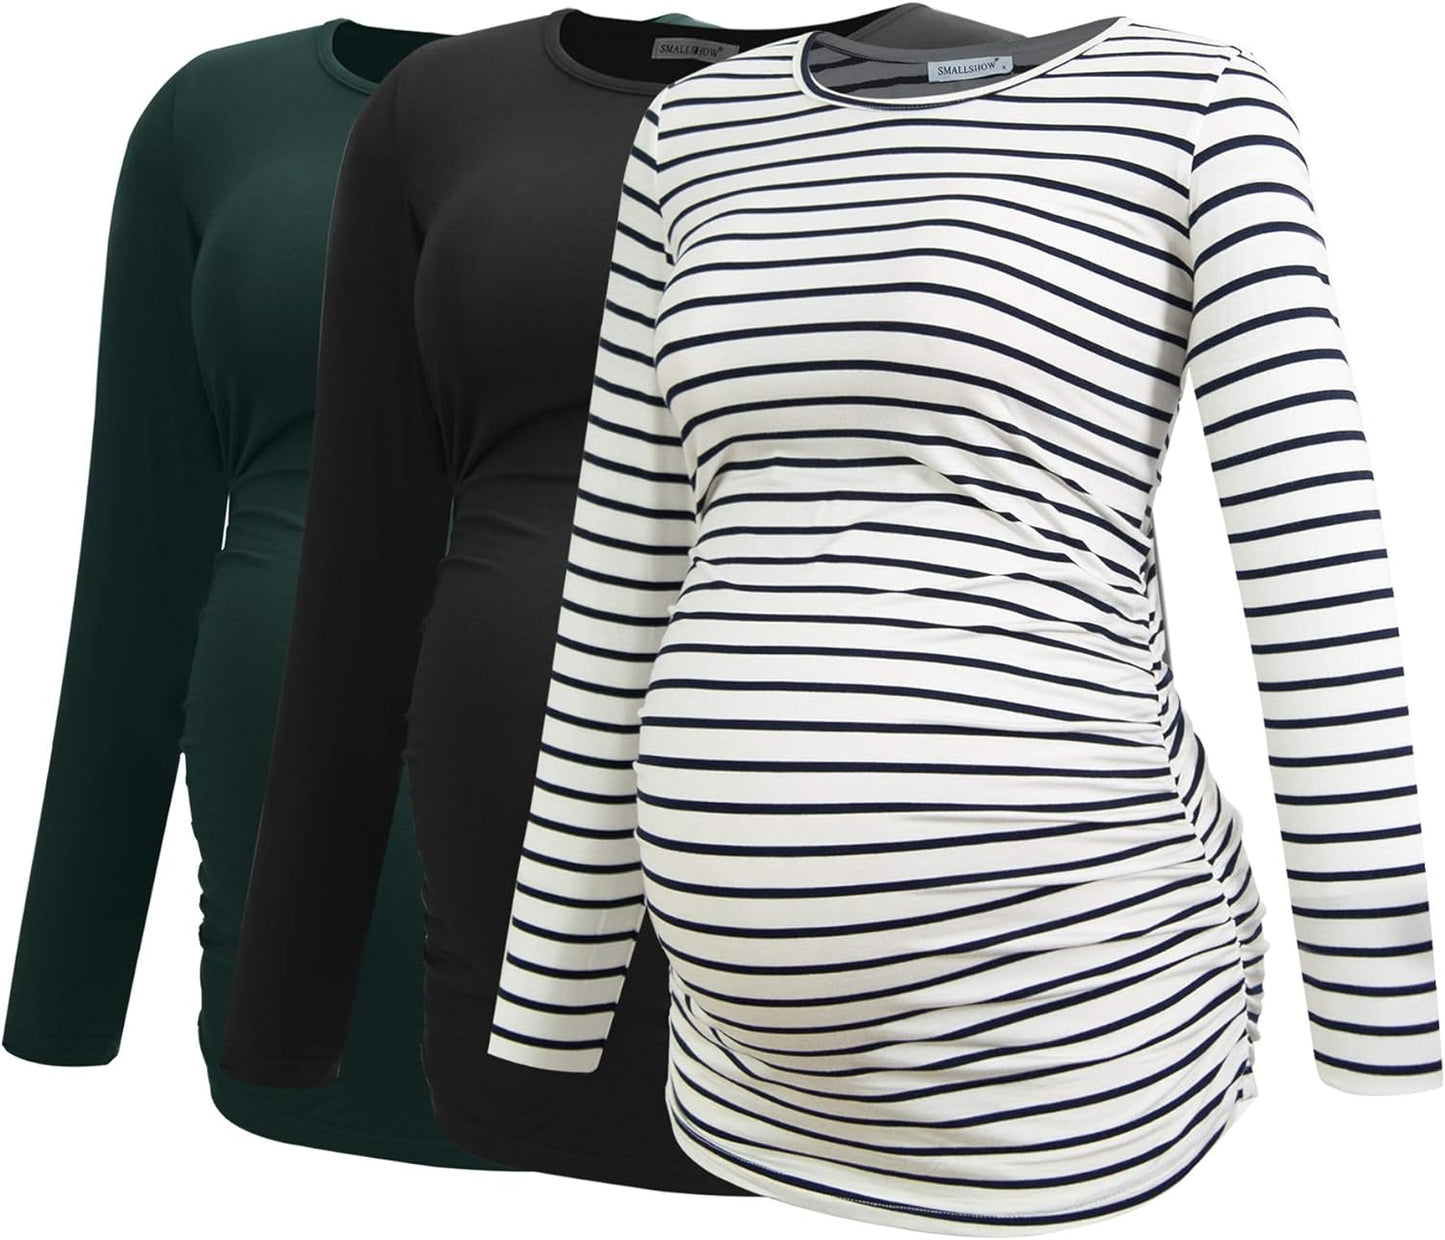 Women'S Maternity Shirts Long Sleeve Pregnancy Clothes Tops 3-Pack